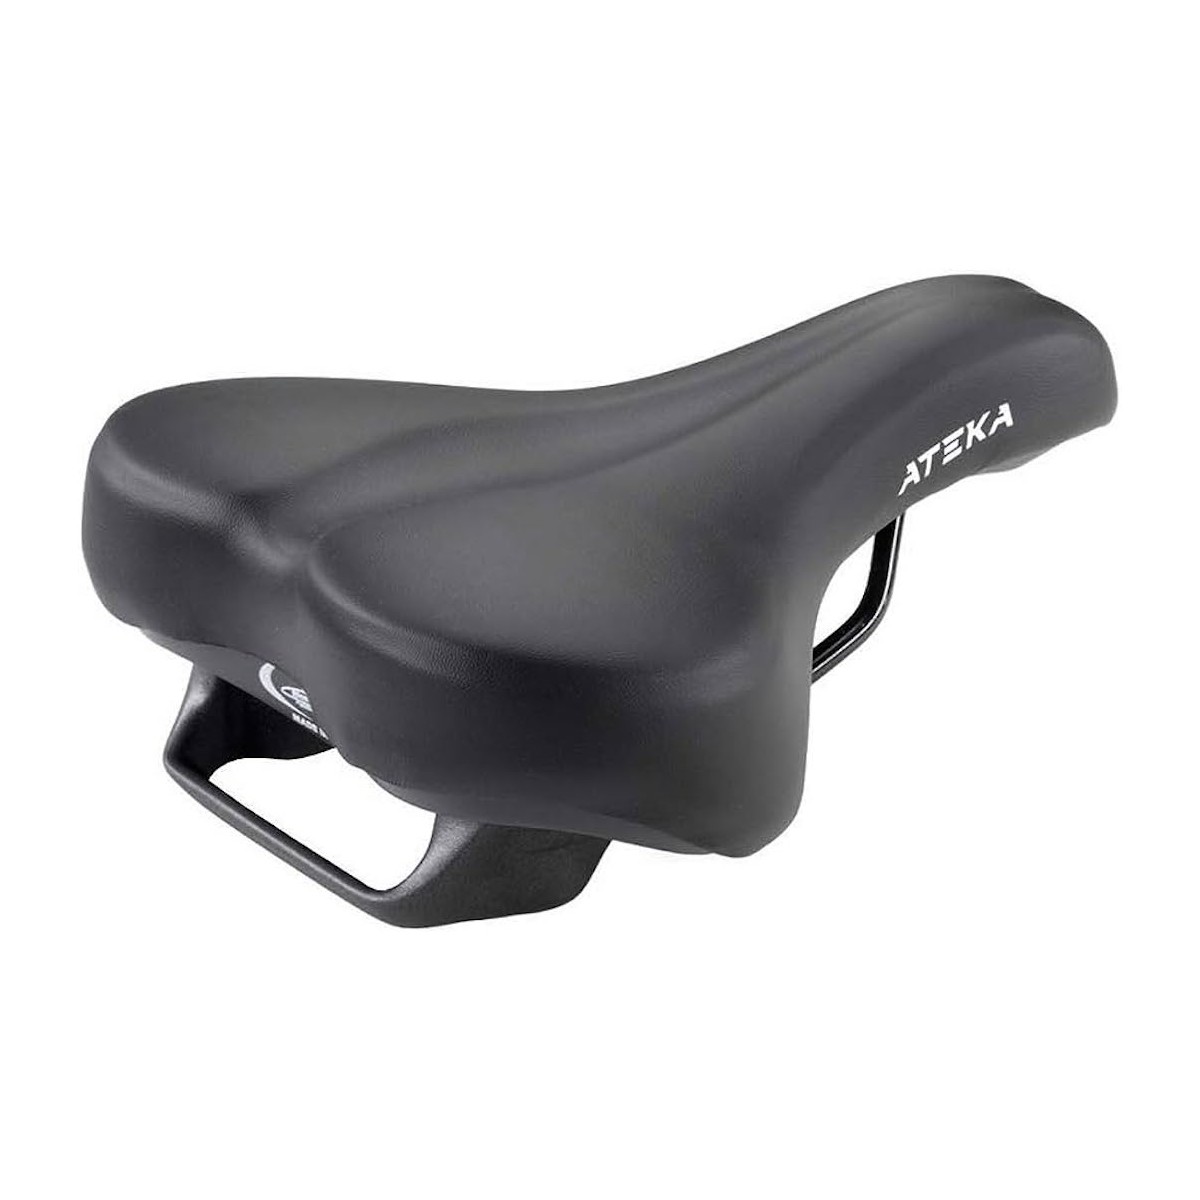 SELLE MONTE GRAPPA ATEKA WITH HANDLE 255X200MM saddle - black